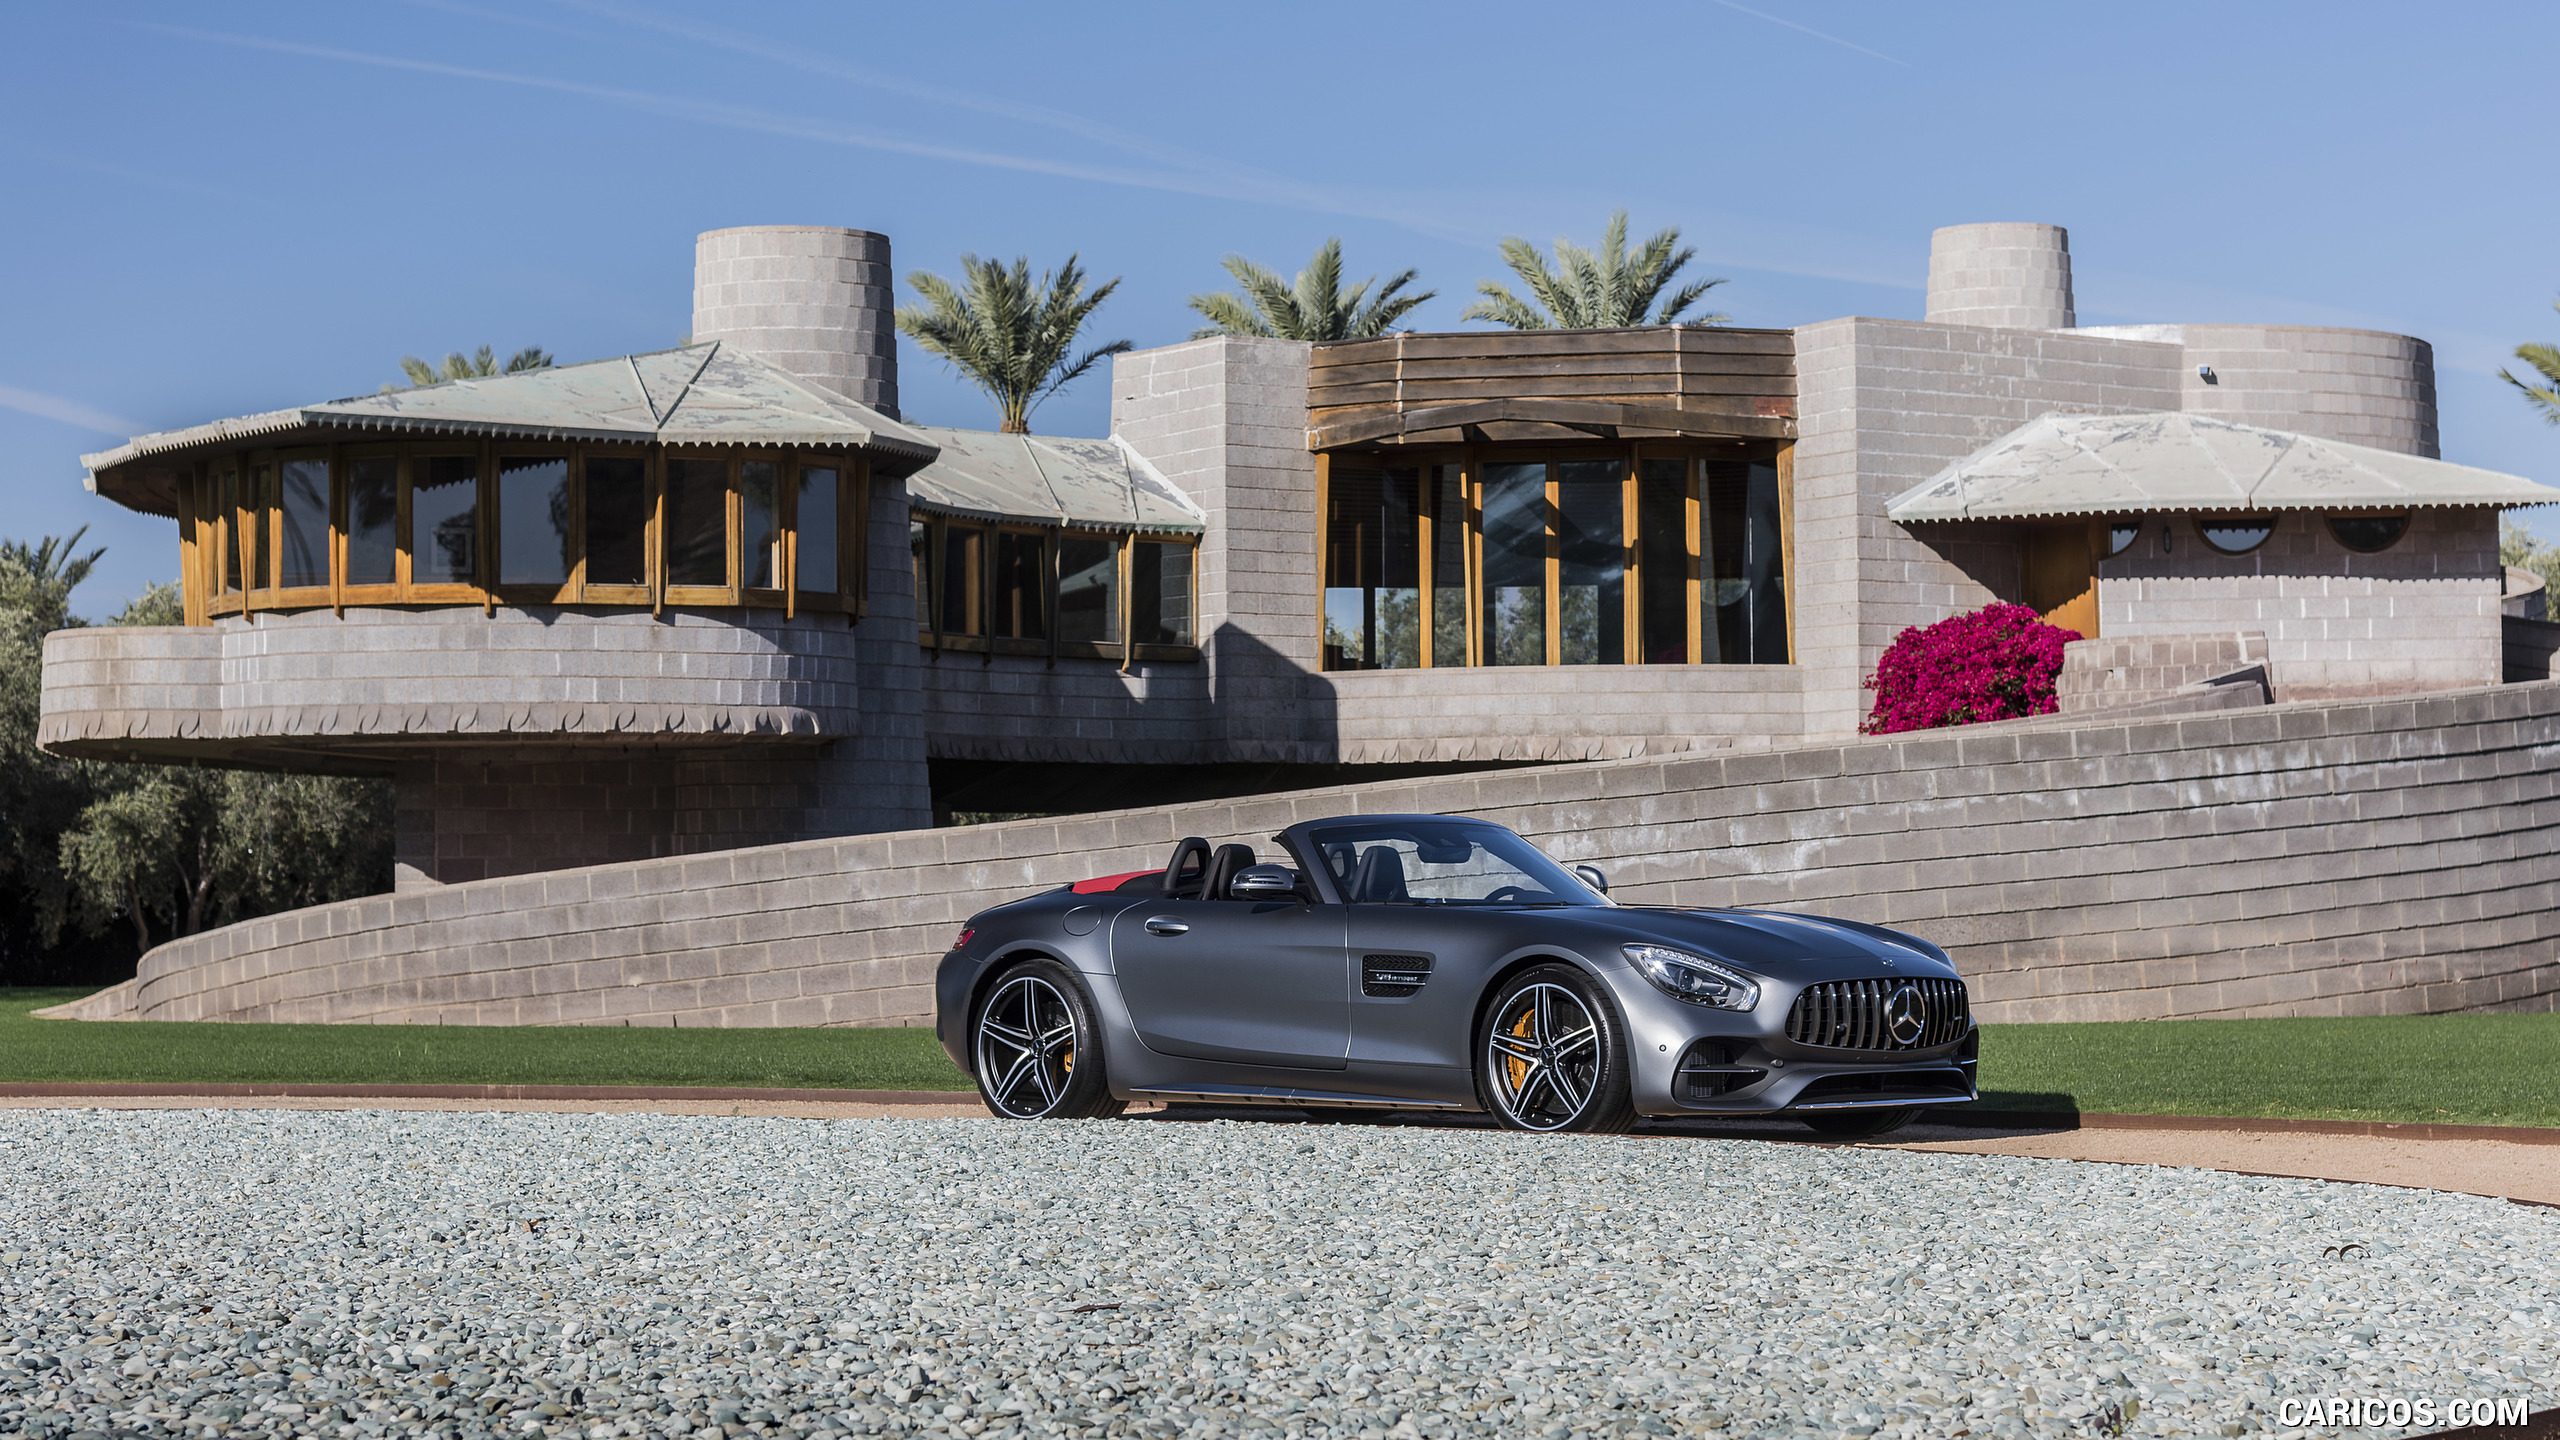 2018 Mercedes-AMG GT C Roadster - Front Three-Quarter, #326 of 350